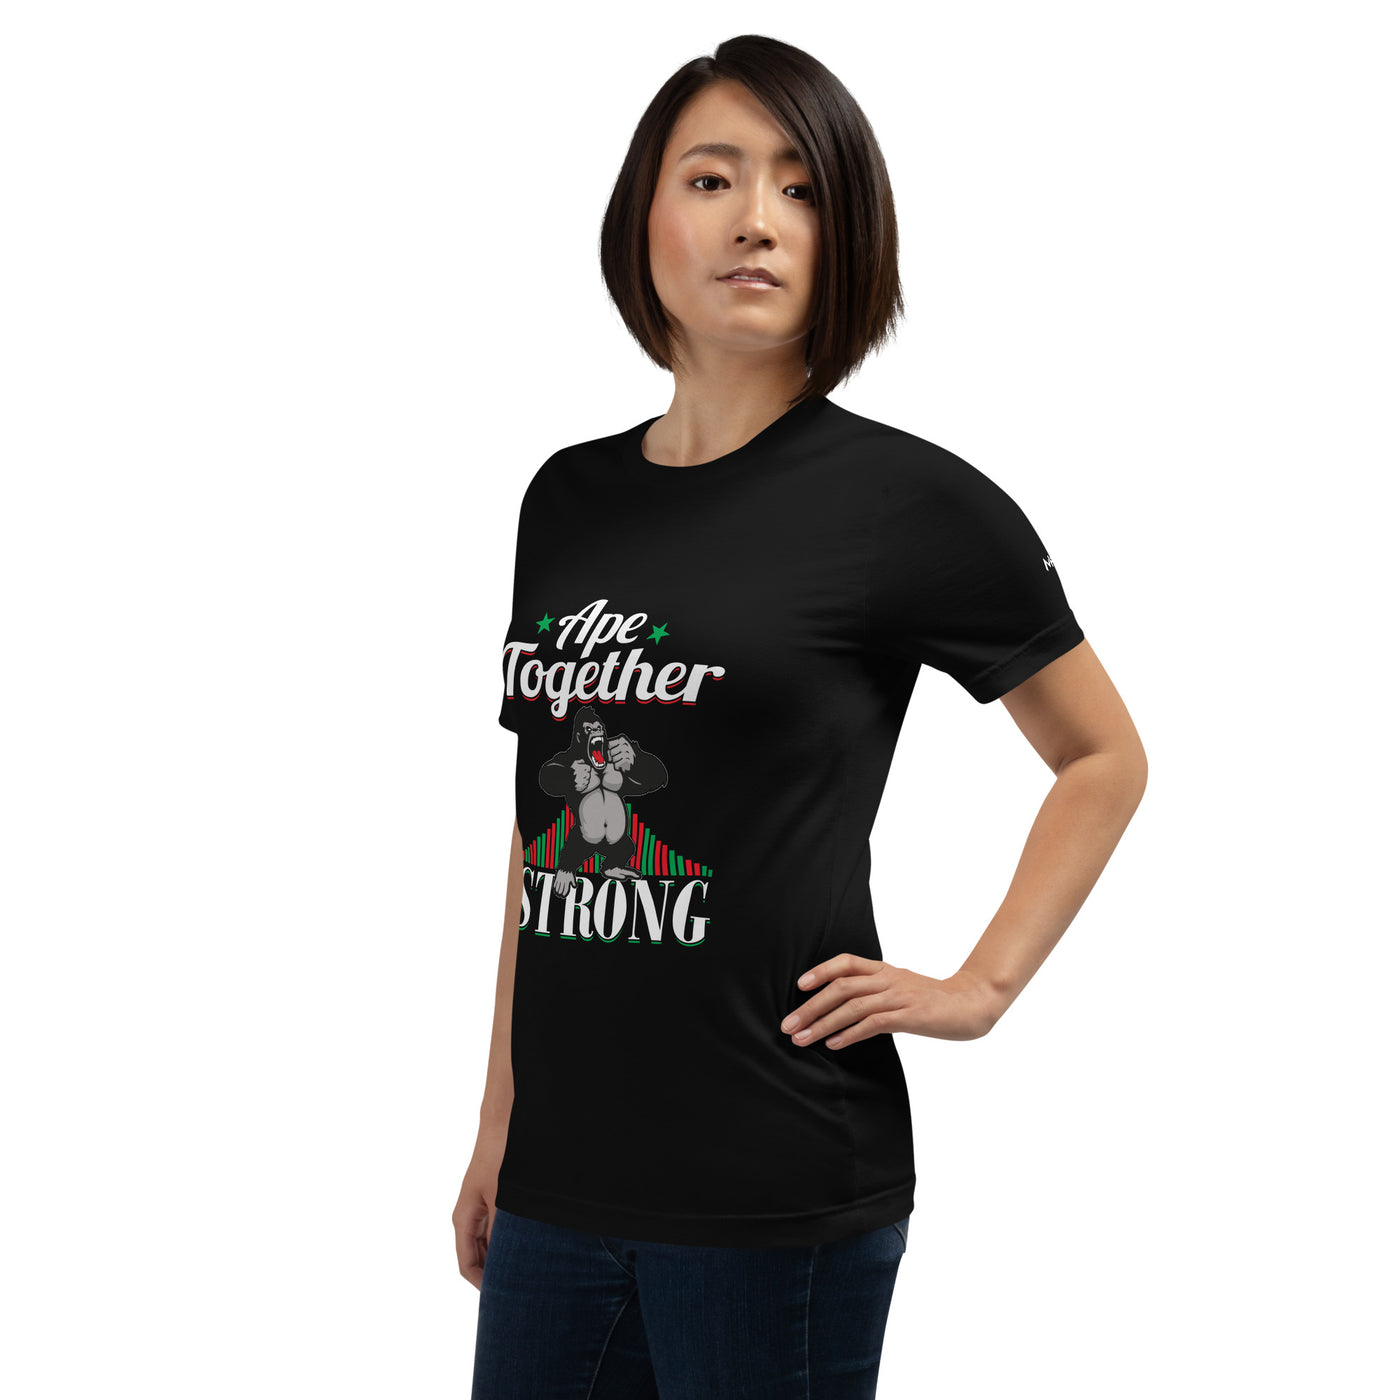 Ape together strong - Unisex t-shirt